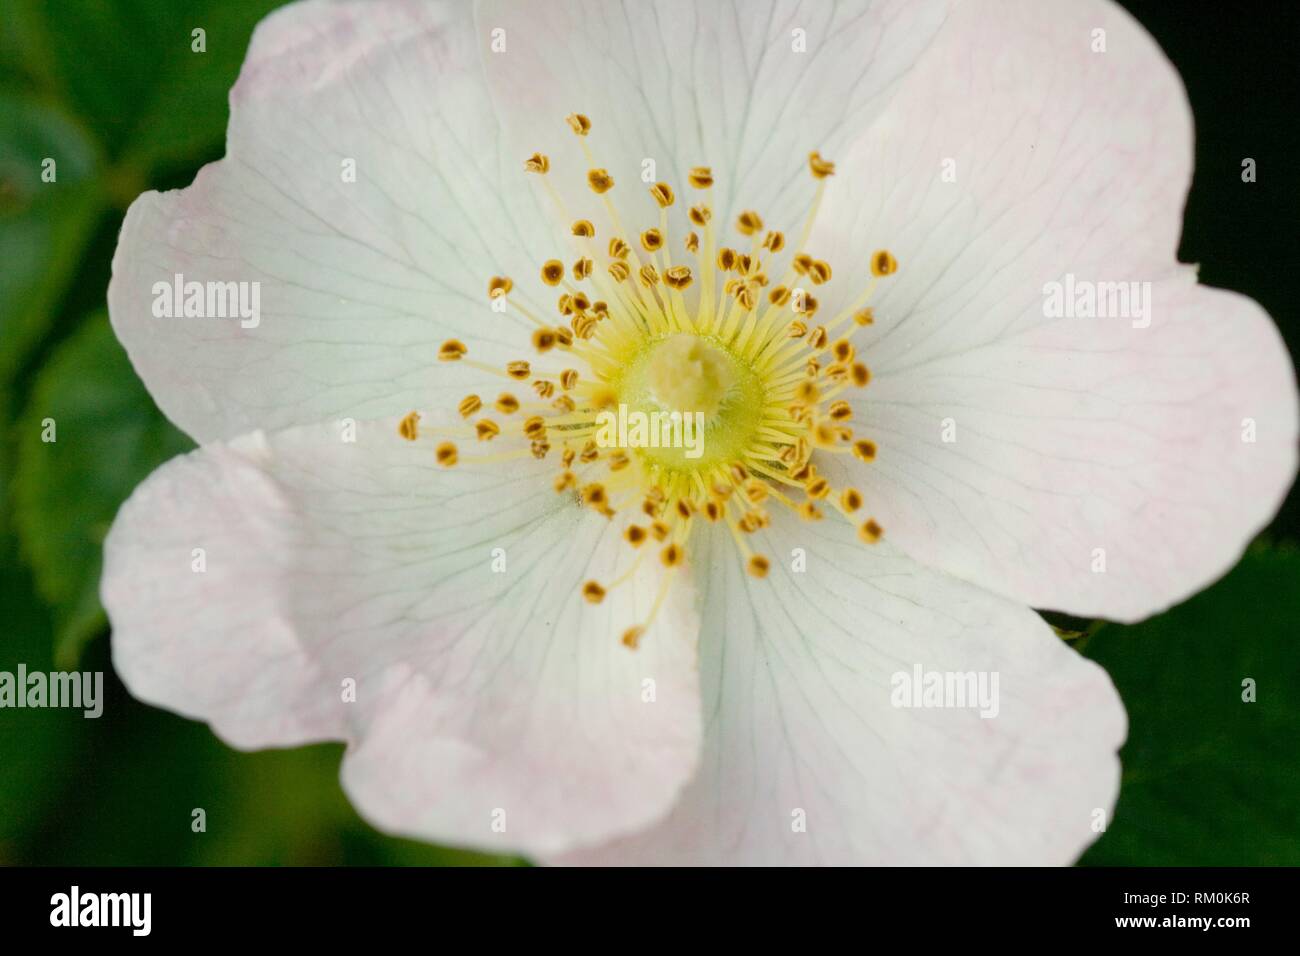 Wild Dog Rose, Rosa canina. Plant used widely for syrups, tea, jellies.  Fruit is extremely high in Vitamin C. Products using flower include creams  Stock Photo - Alamy